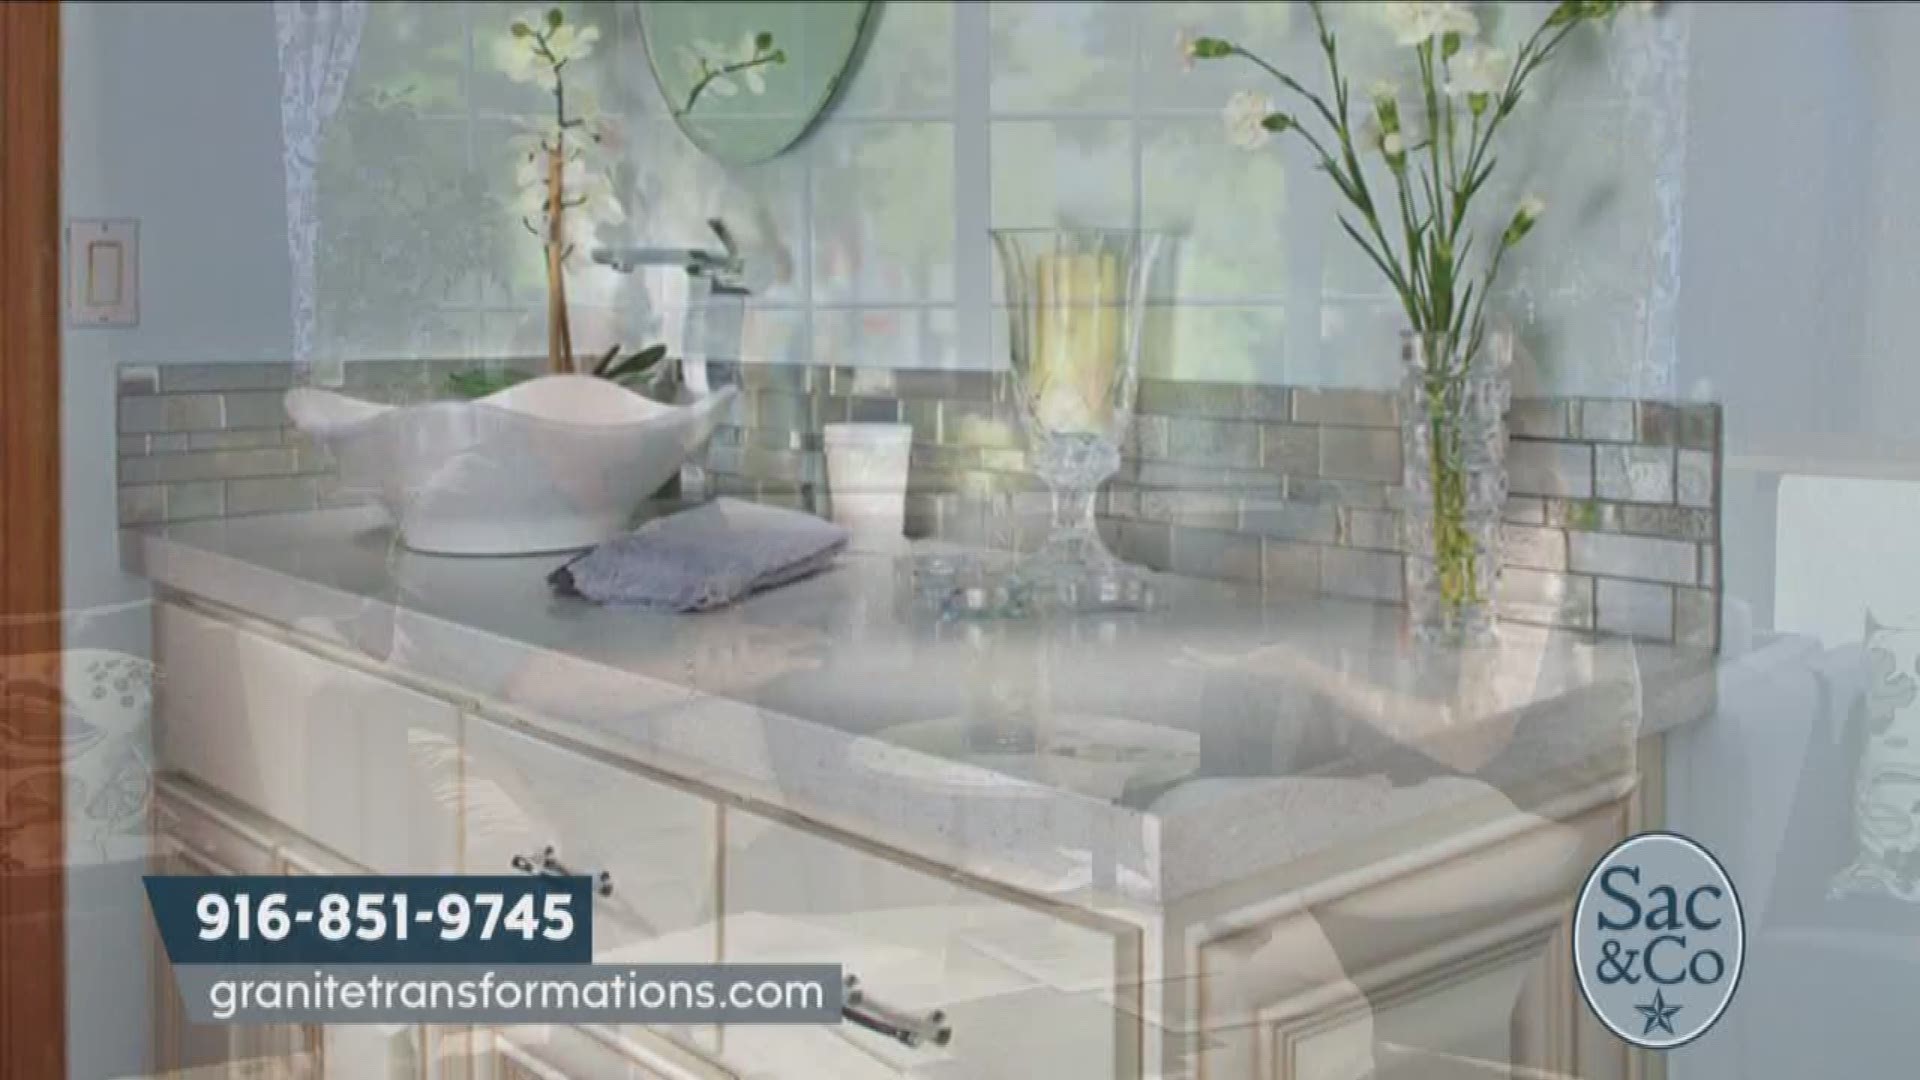 See how Granite Transformations can make that dream bathroom a reality.